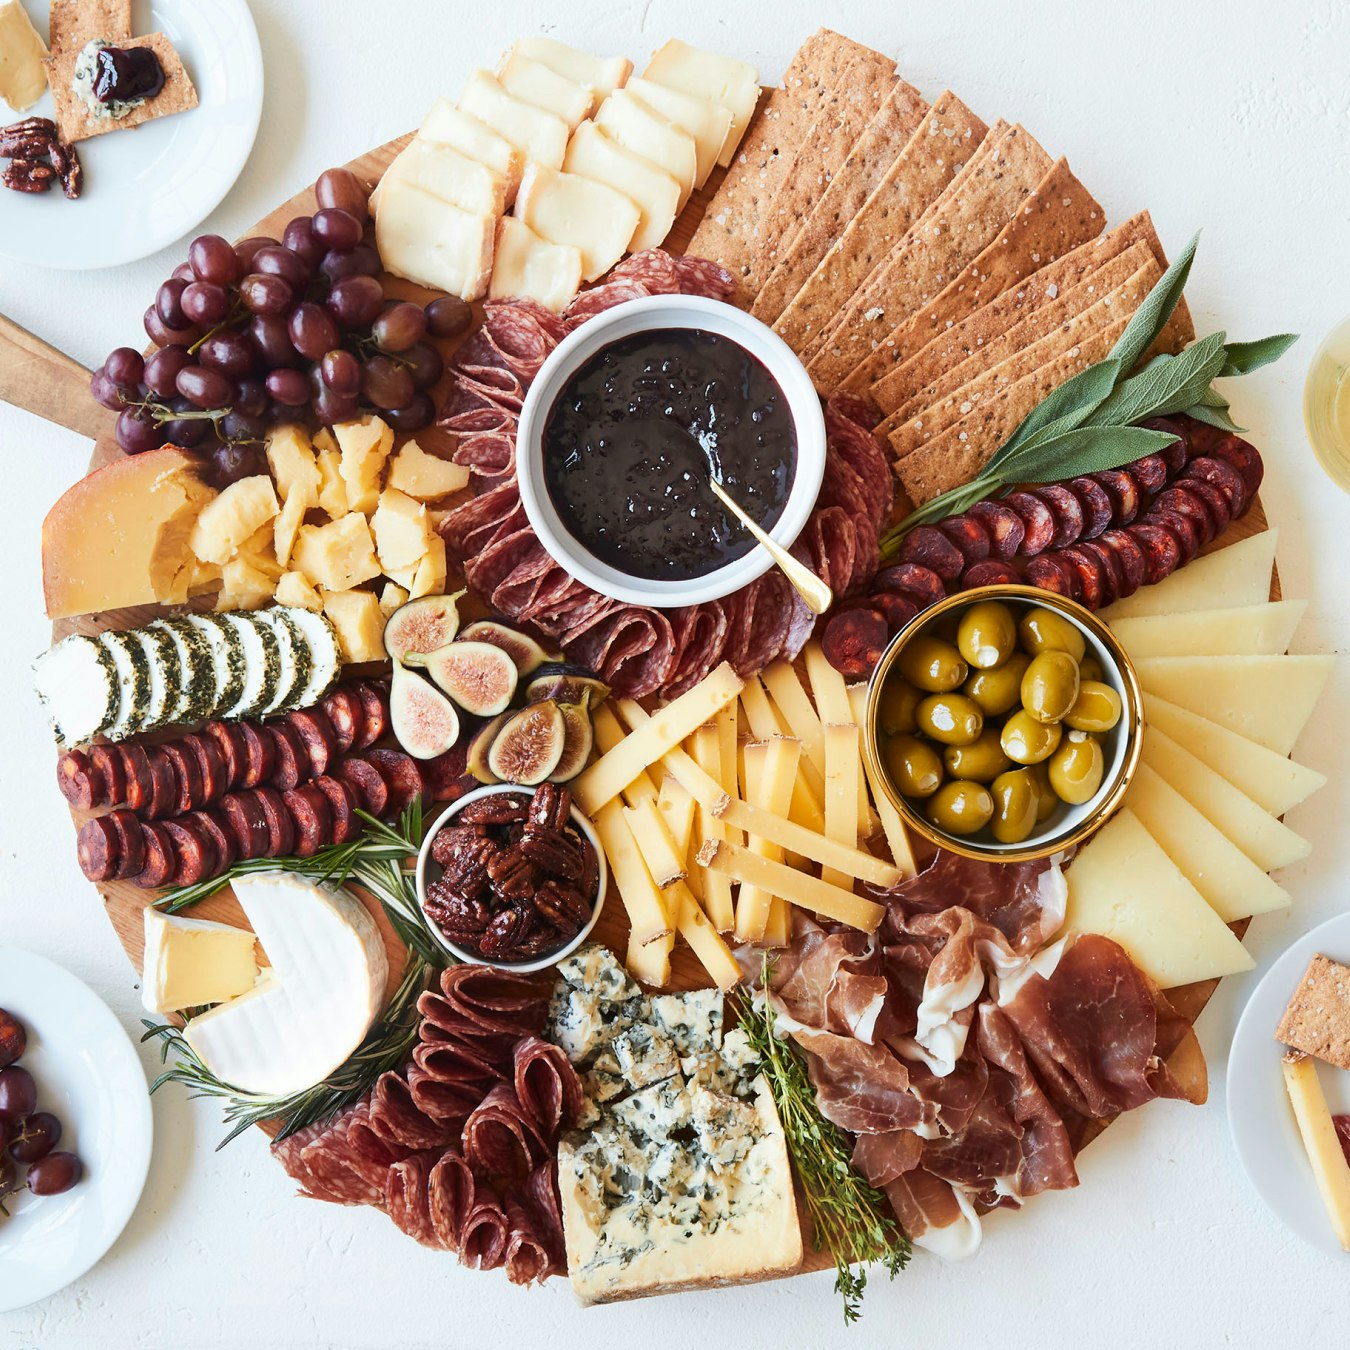 View item Grand Charcuterie Celebration: Featured in theSkimm